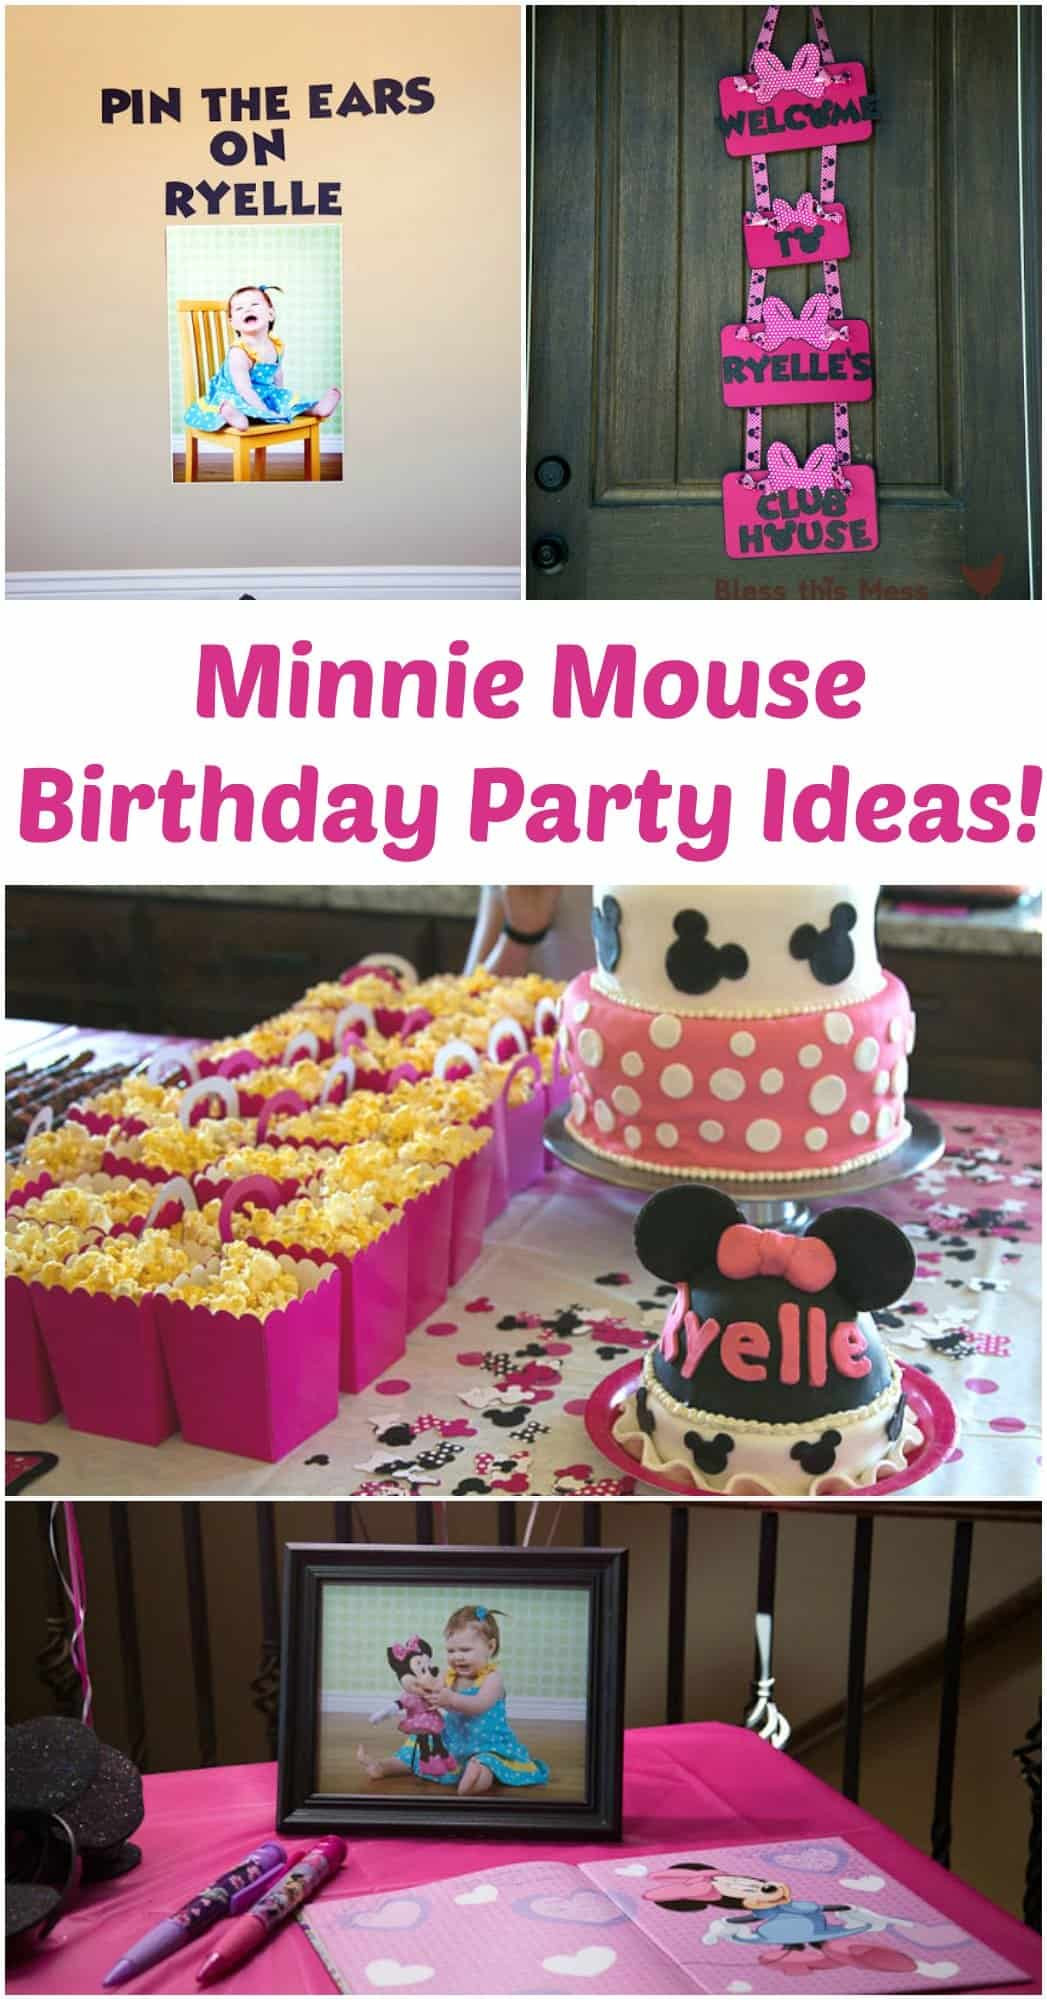 DIY Minnie Mouse Party Decorations
 Minnie Mouse Birthday Party